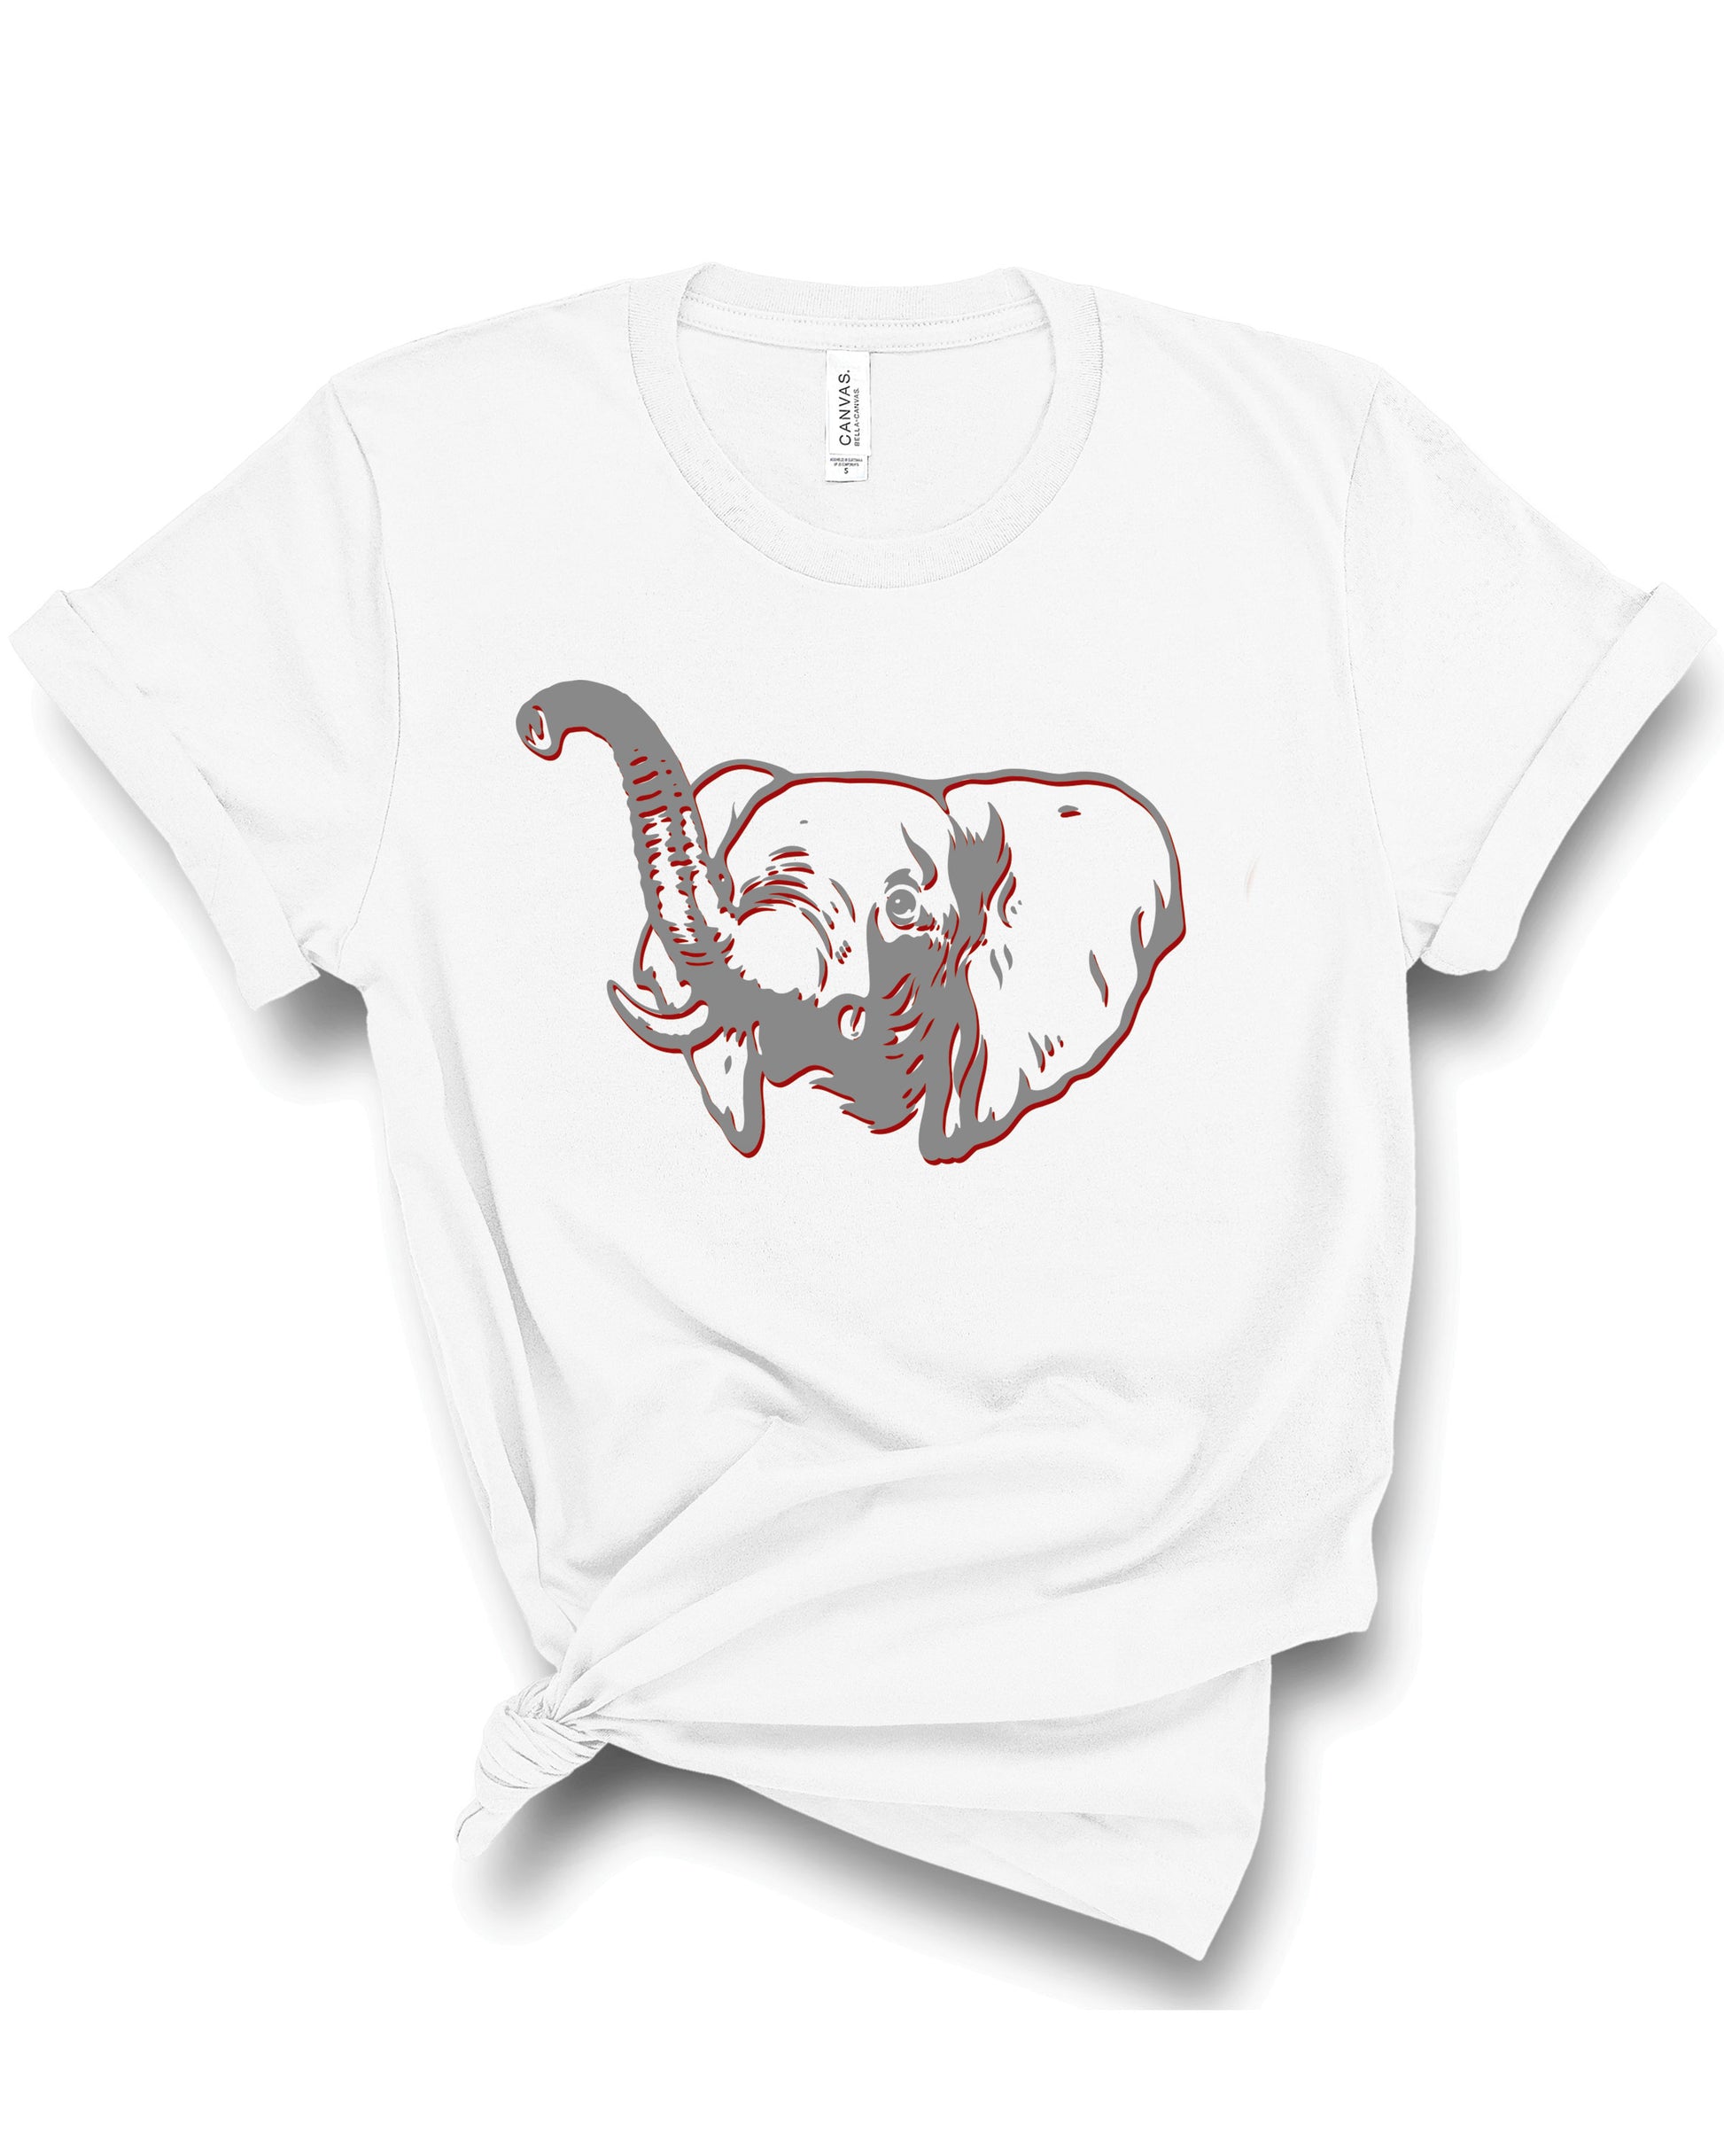 Sketch Elephant | Adult Tee-Adult Tee-Sister Shirts-Sister Shirts, Cute & Custom Tees for Mama & Littles in Trussville, Alabama.